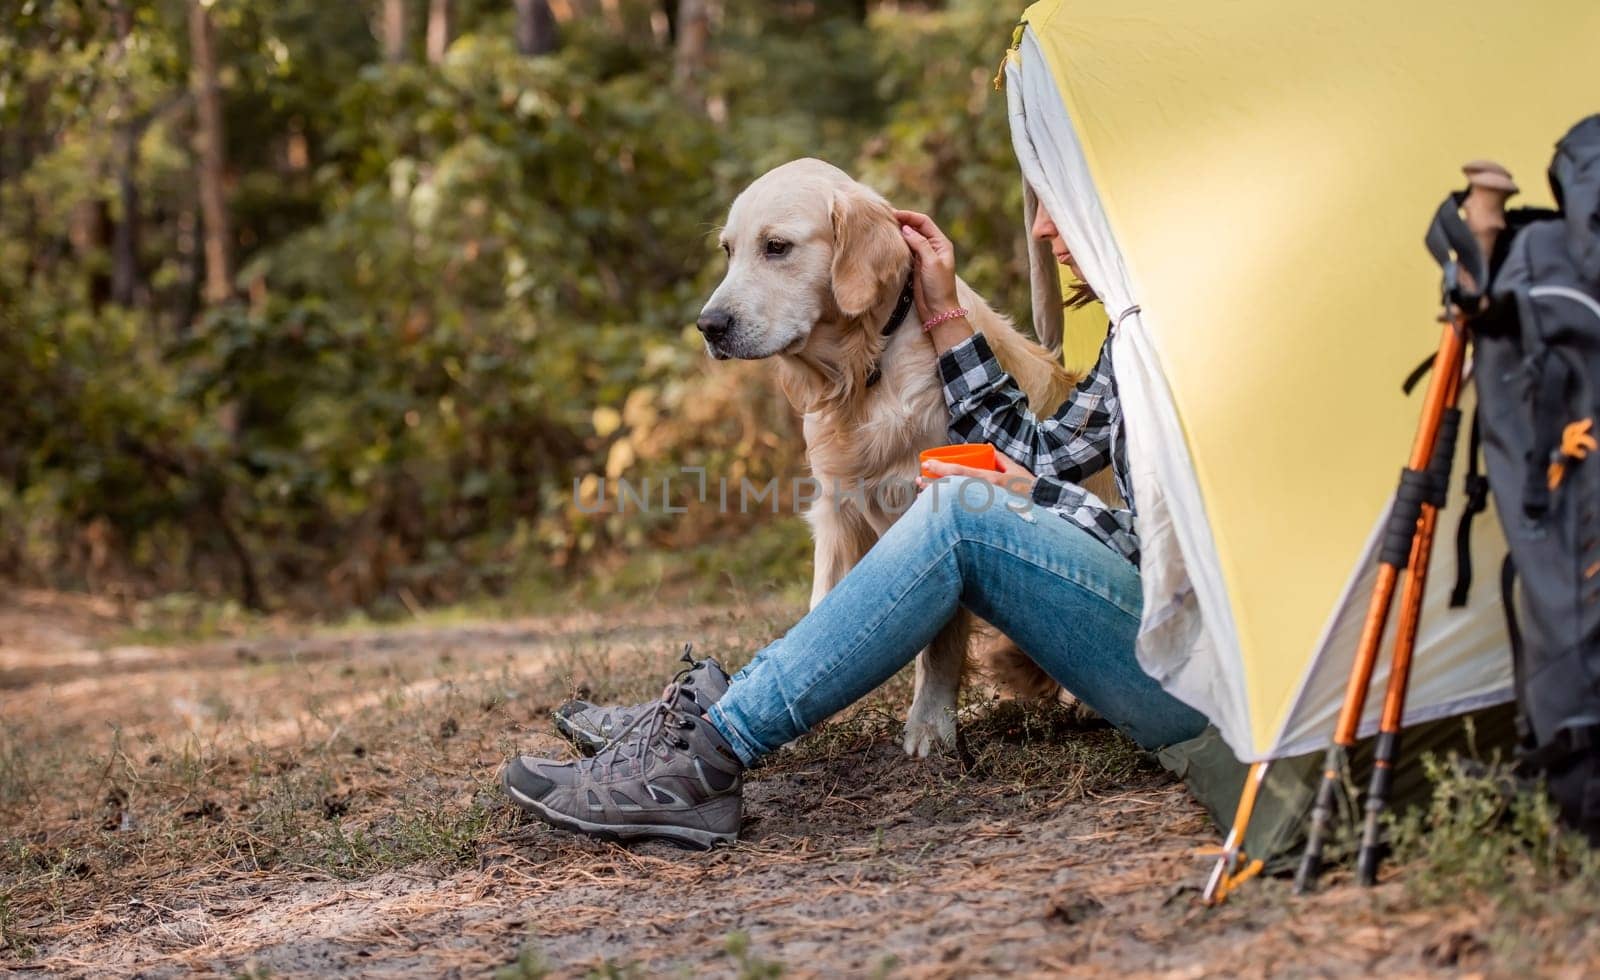 Camping in mountains forest with golden retriever dog by GekaSkr